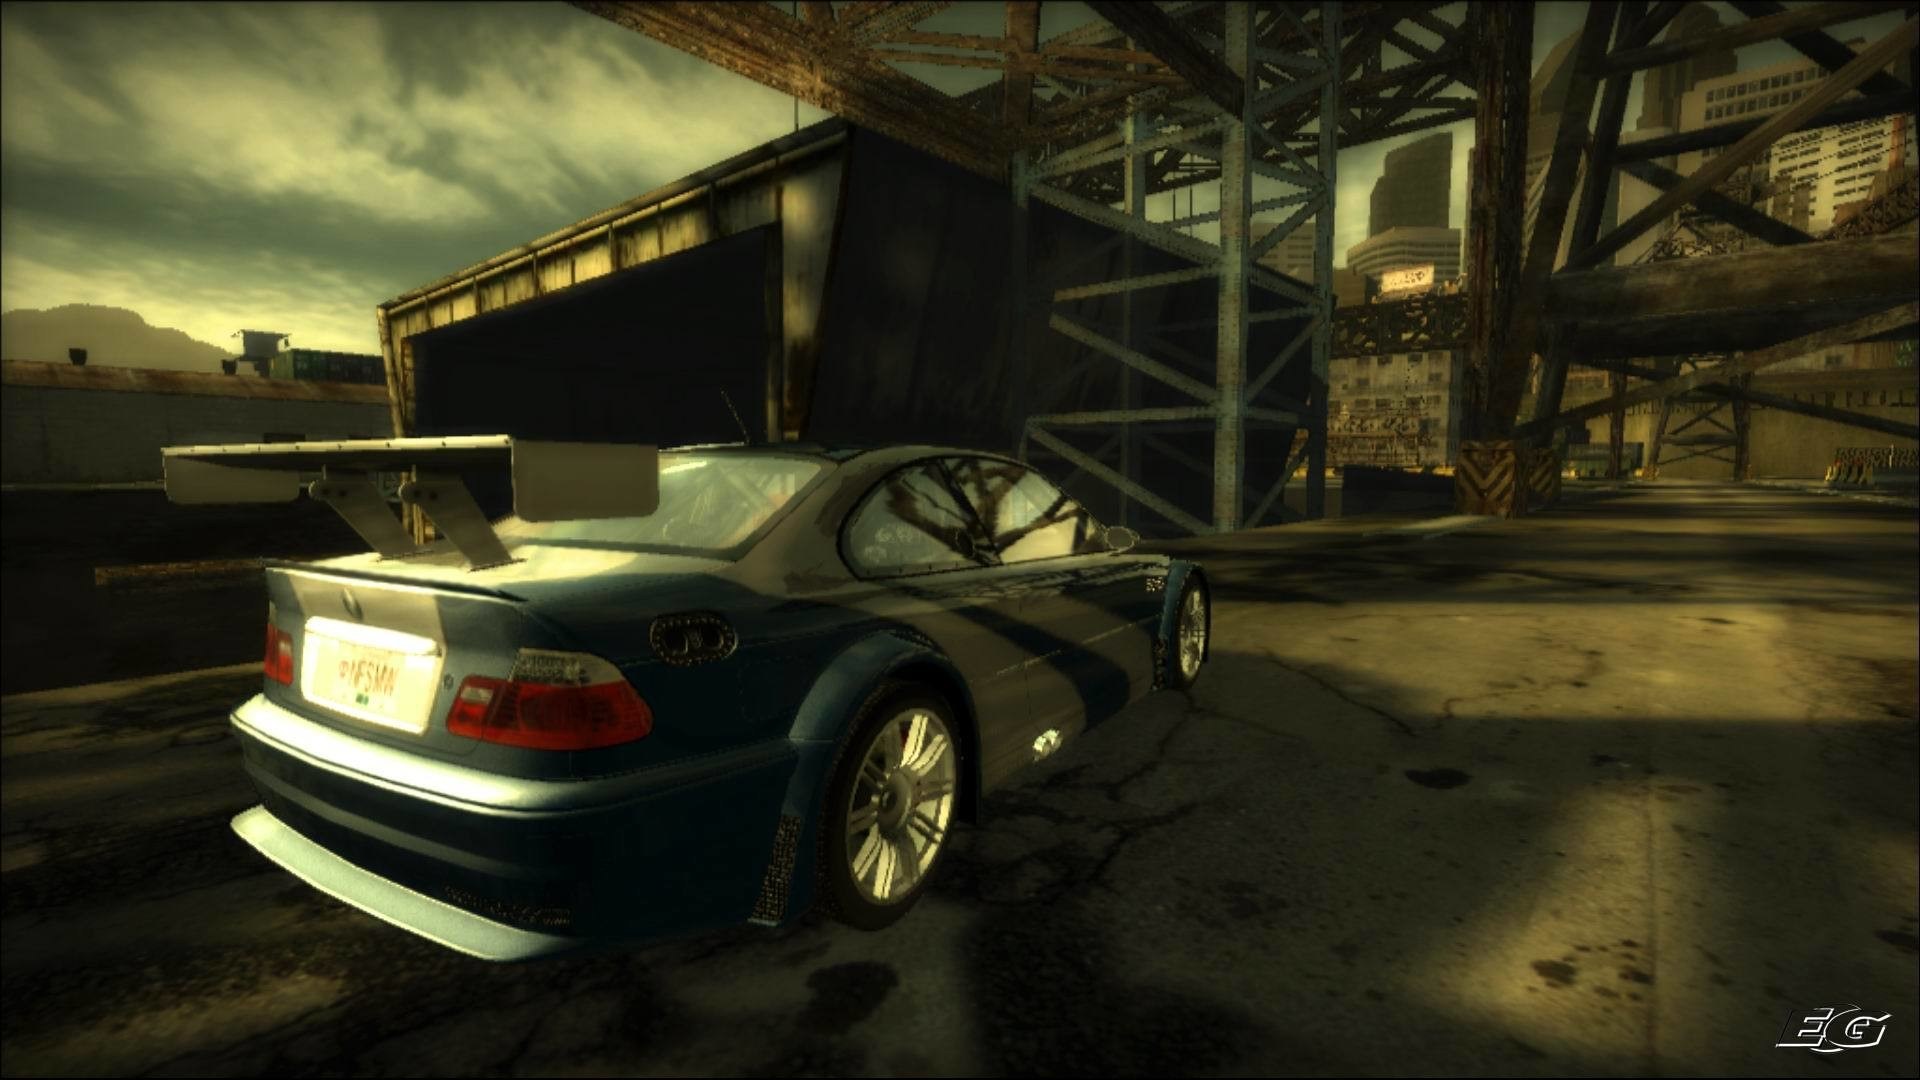 Нед фор спид мост вондет. NFS most wanted 2005 мост. Гонки NFS most wanted 2005. Need for Speed most wanted (Xbox 360) Скриншот. Speed NFS MW.